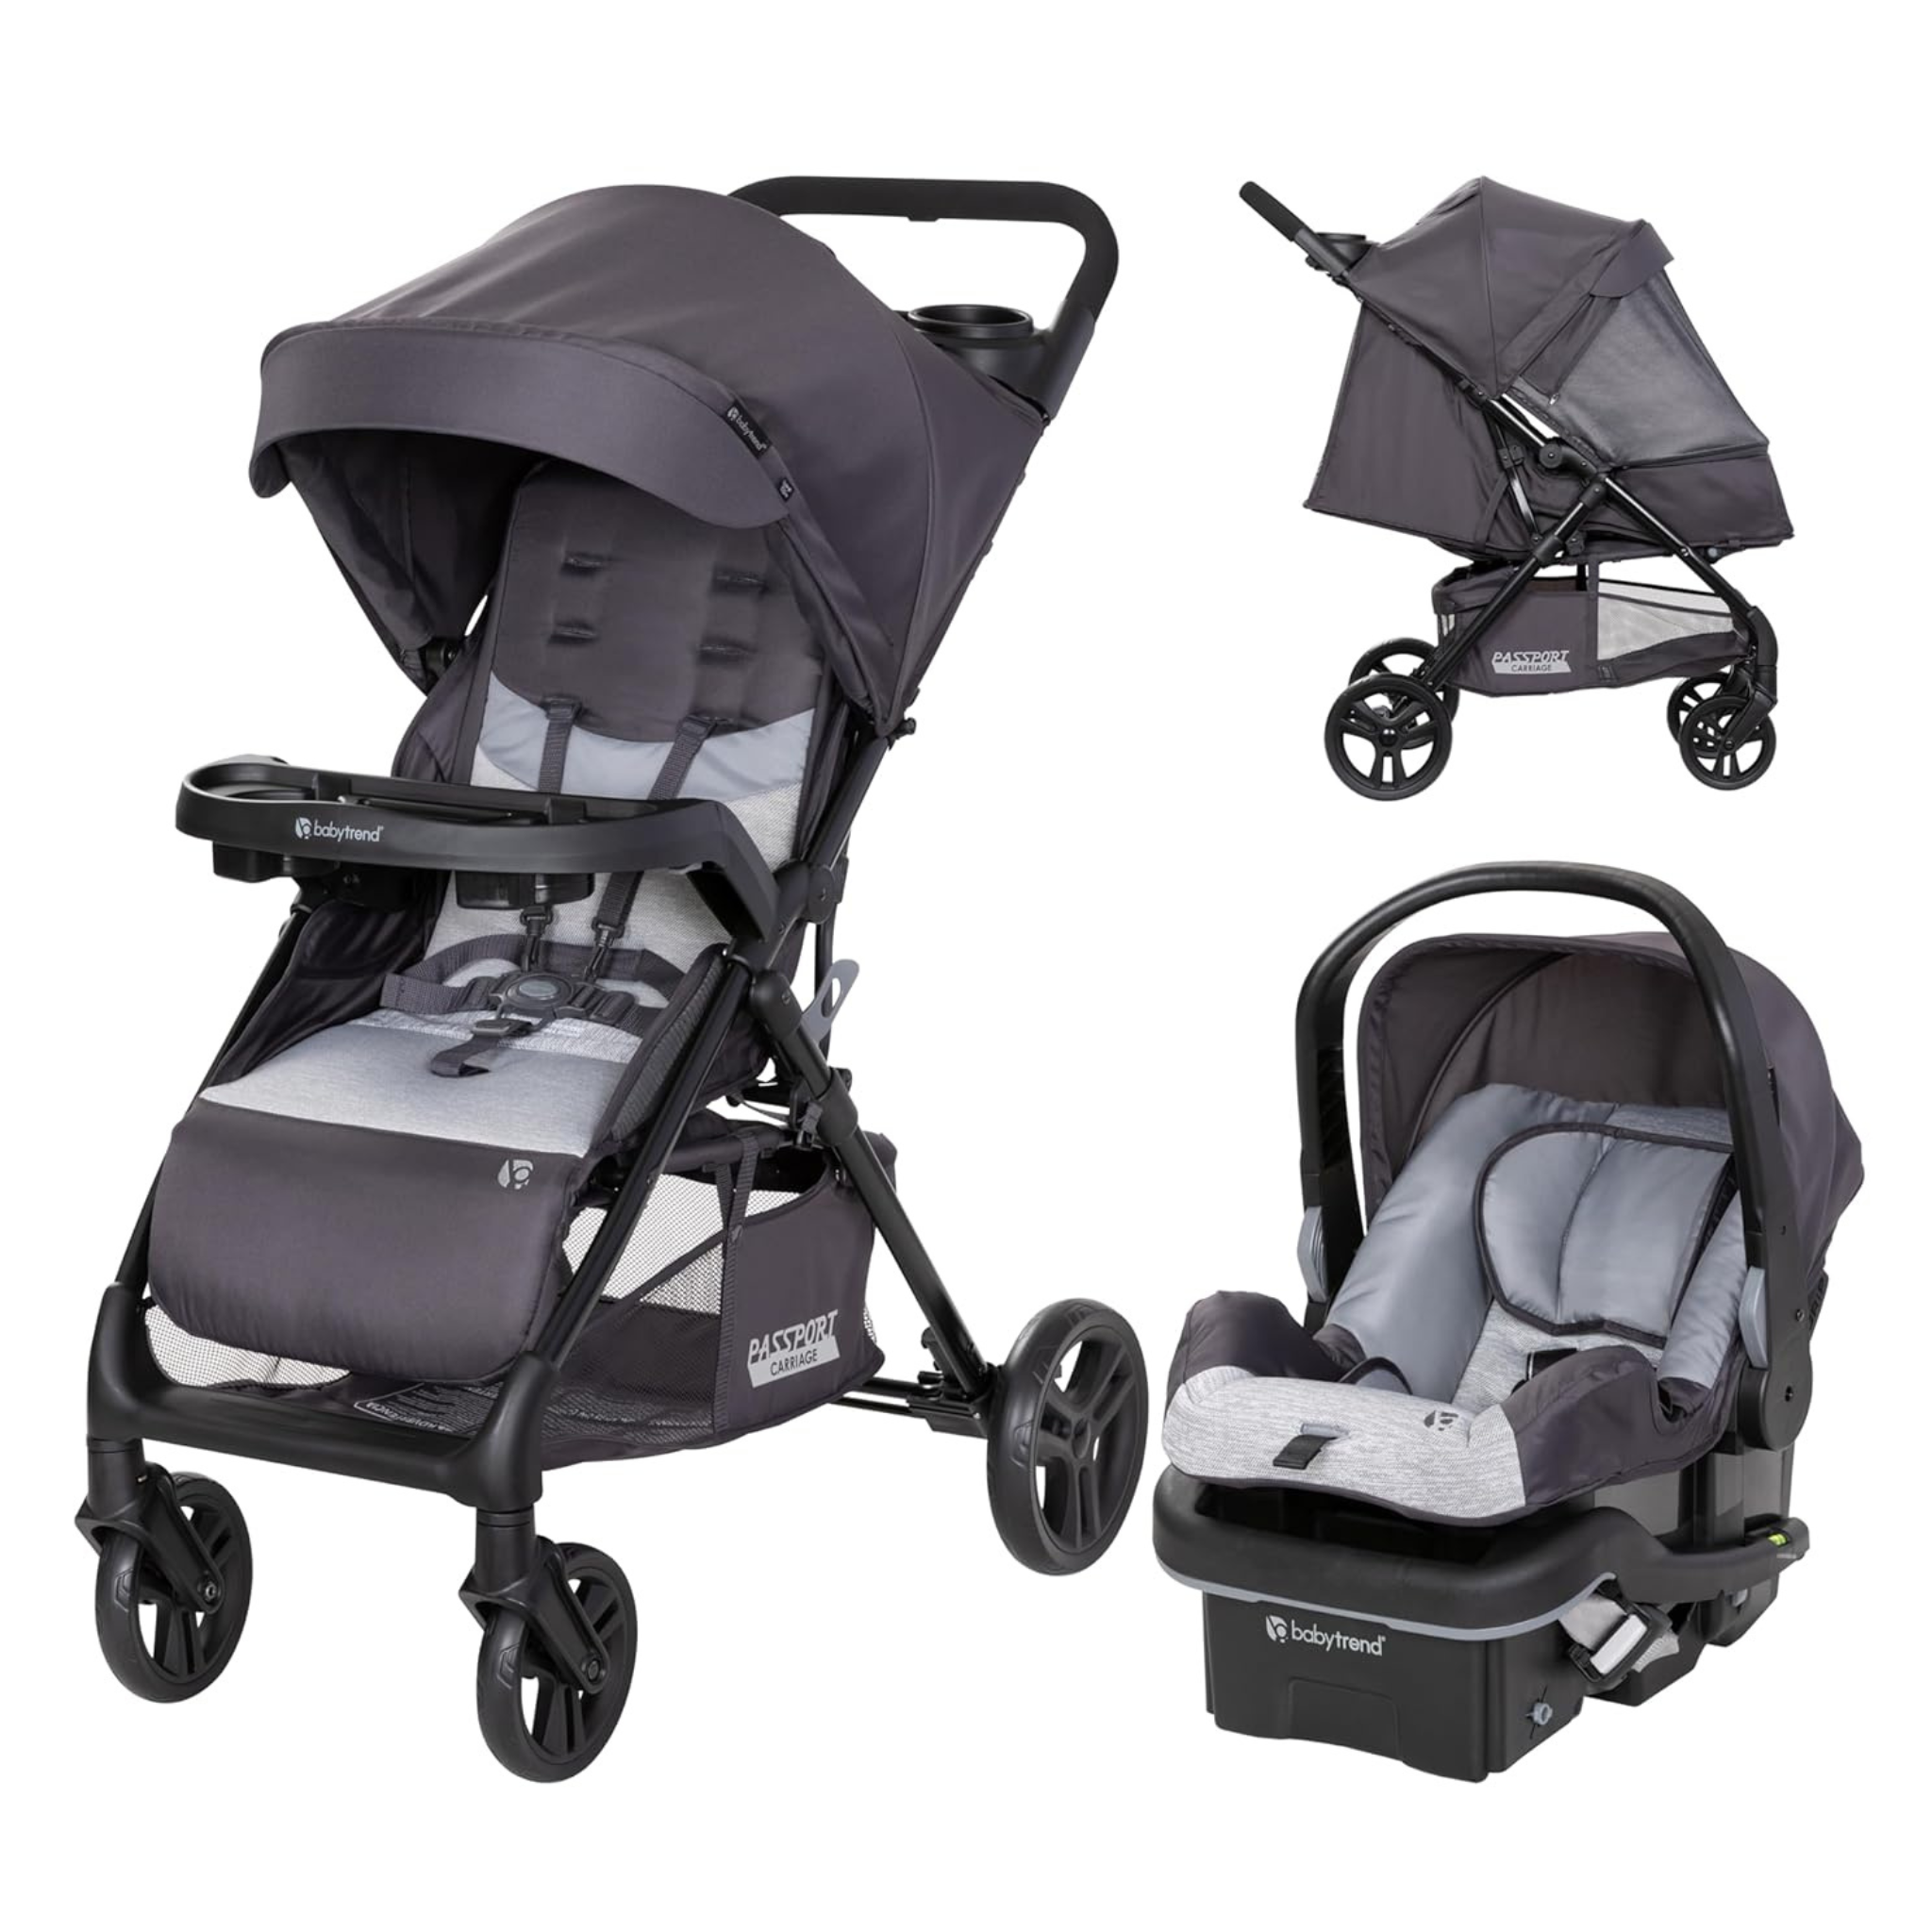 Baby Trend Passport Carriage Travel System